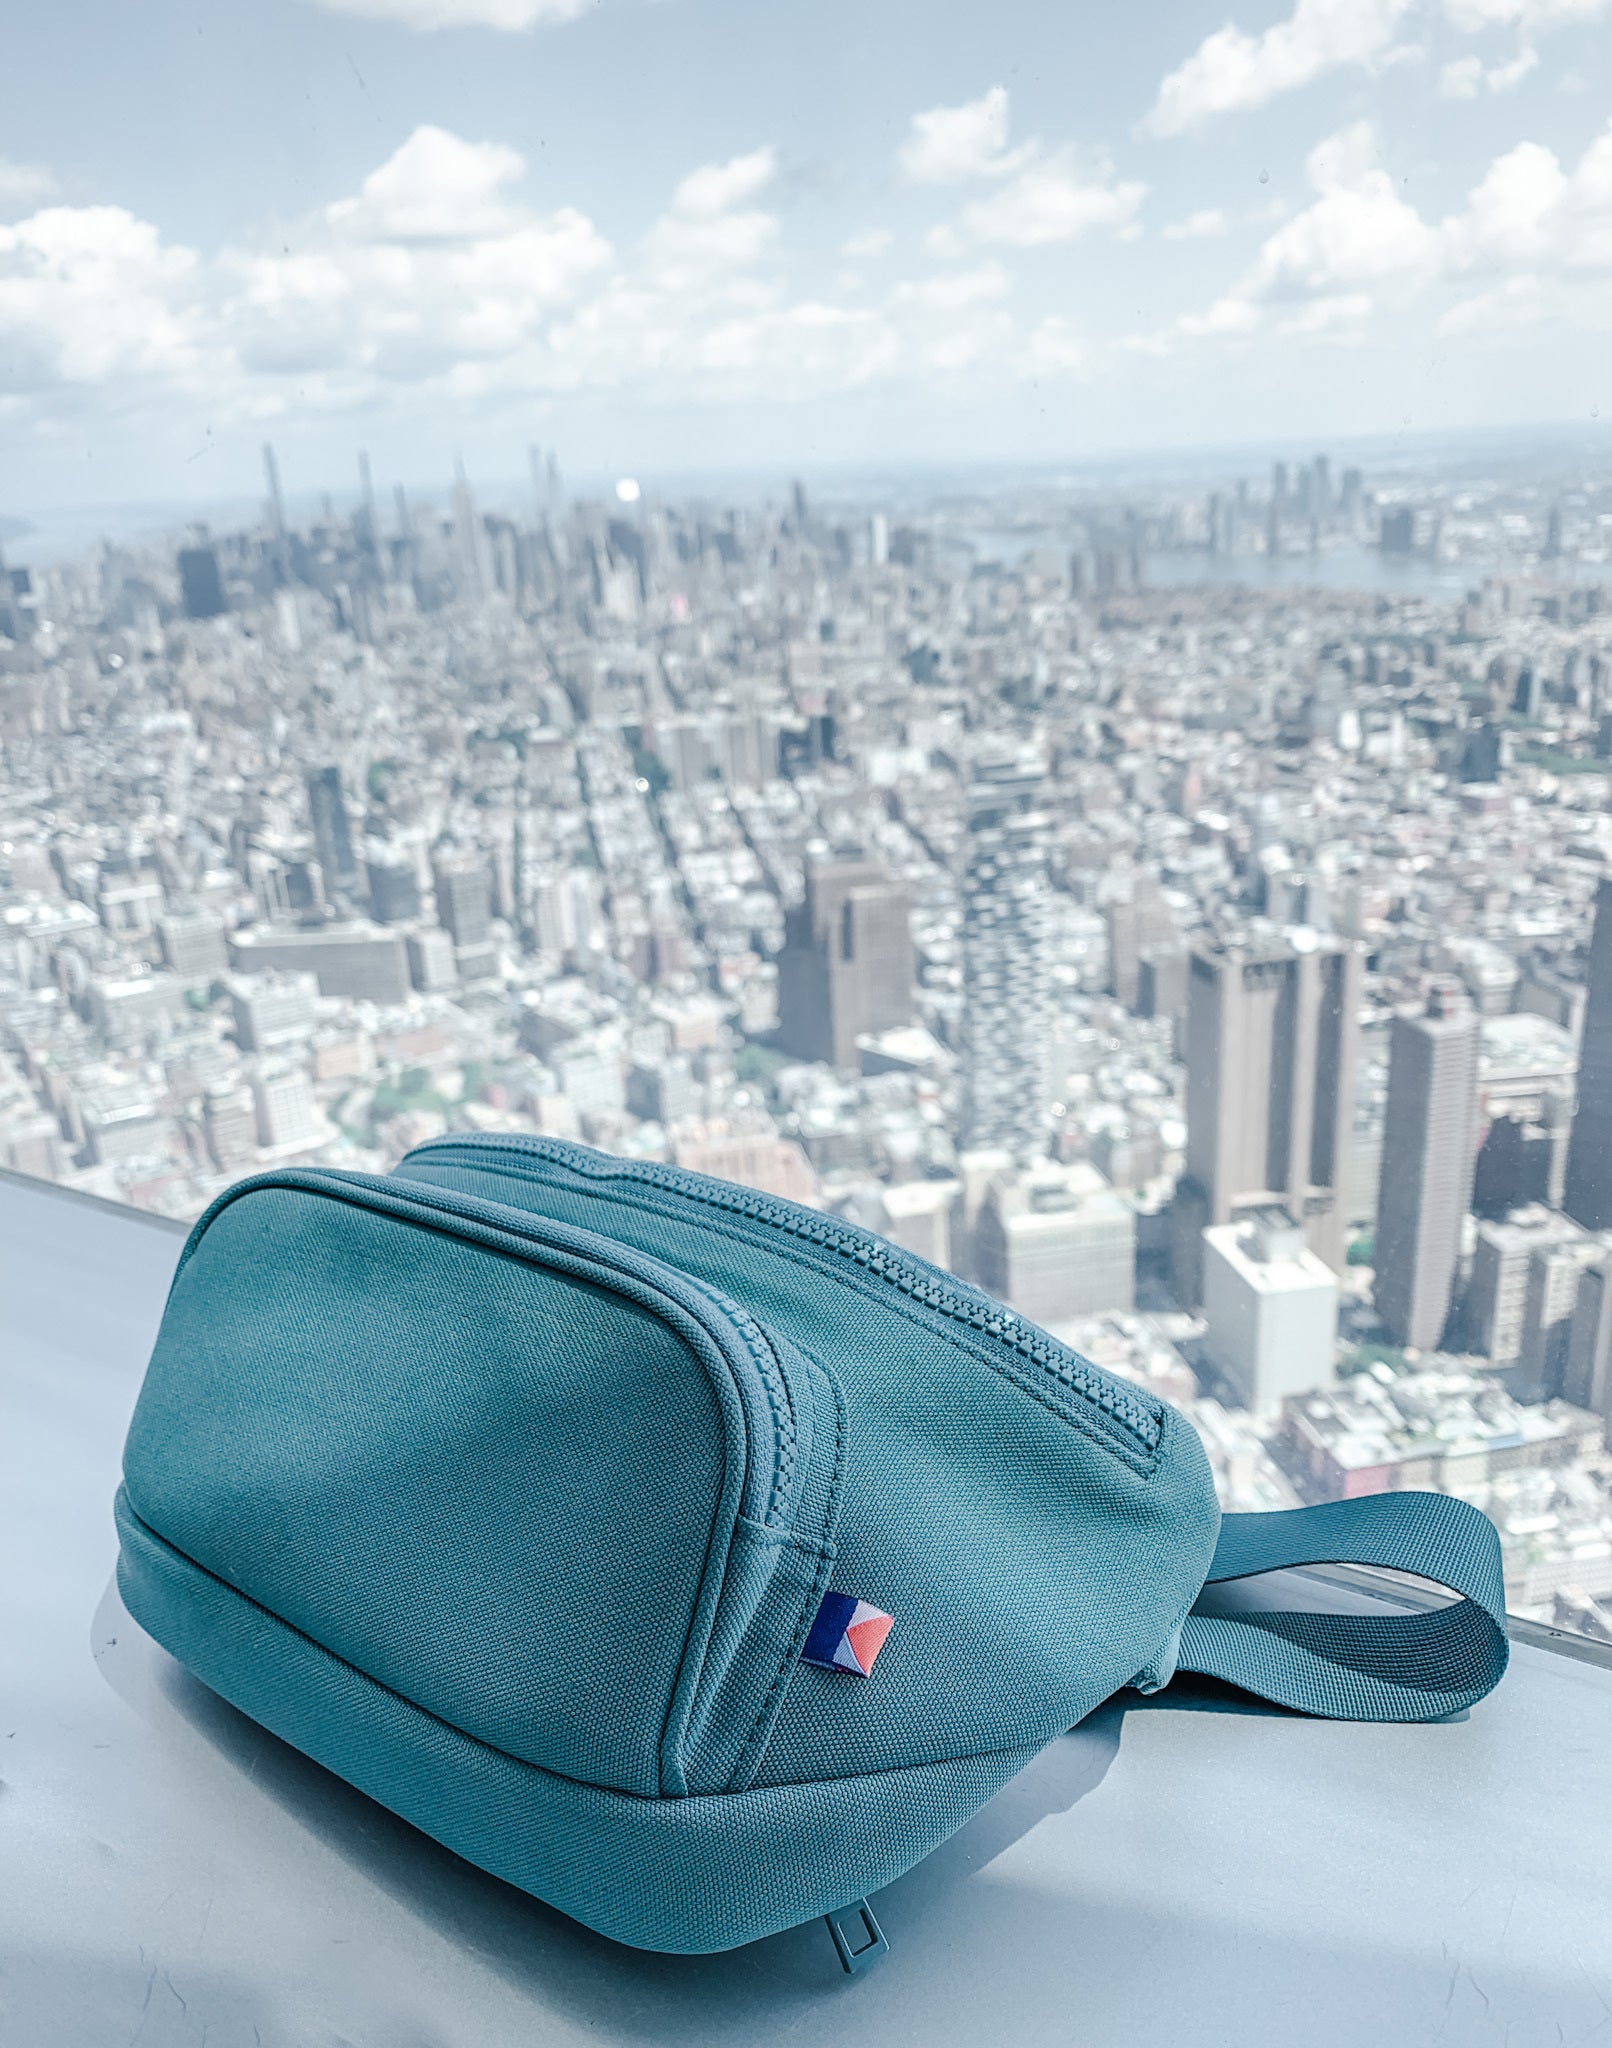 Kibou fanny pack minimalist bag for travel in the city